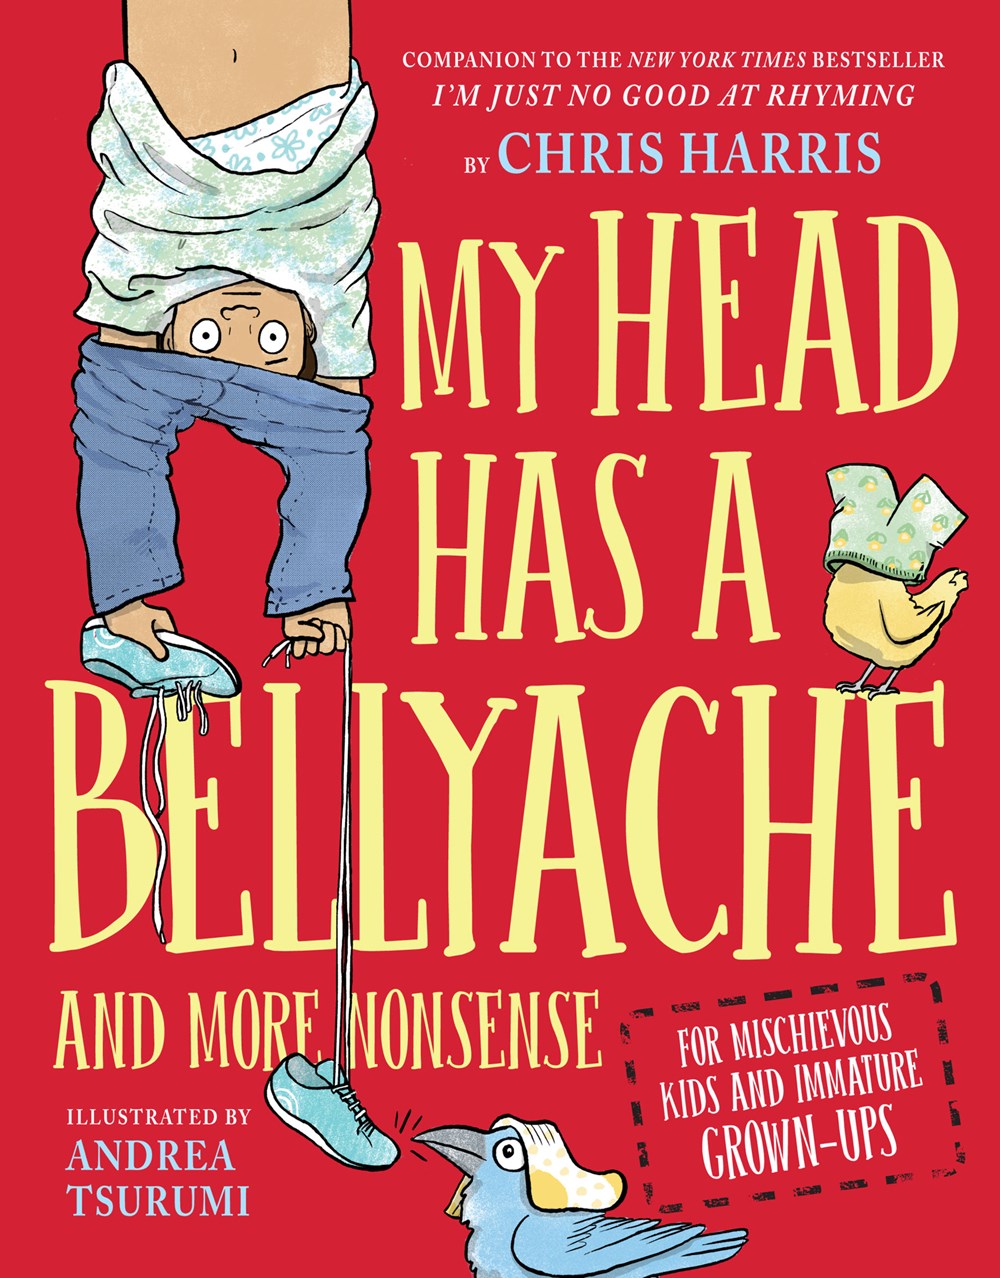 Review of My Head Has a Bellyache: And More Nonsense for Mischievous Kids and Immature Grown-Ups